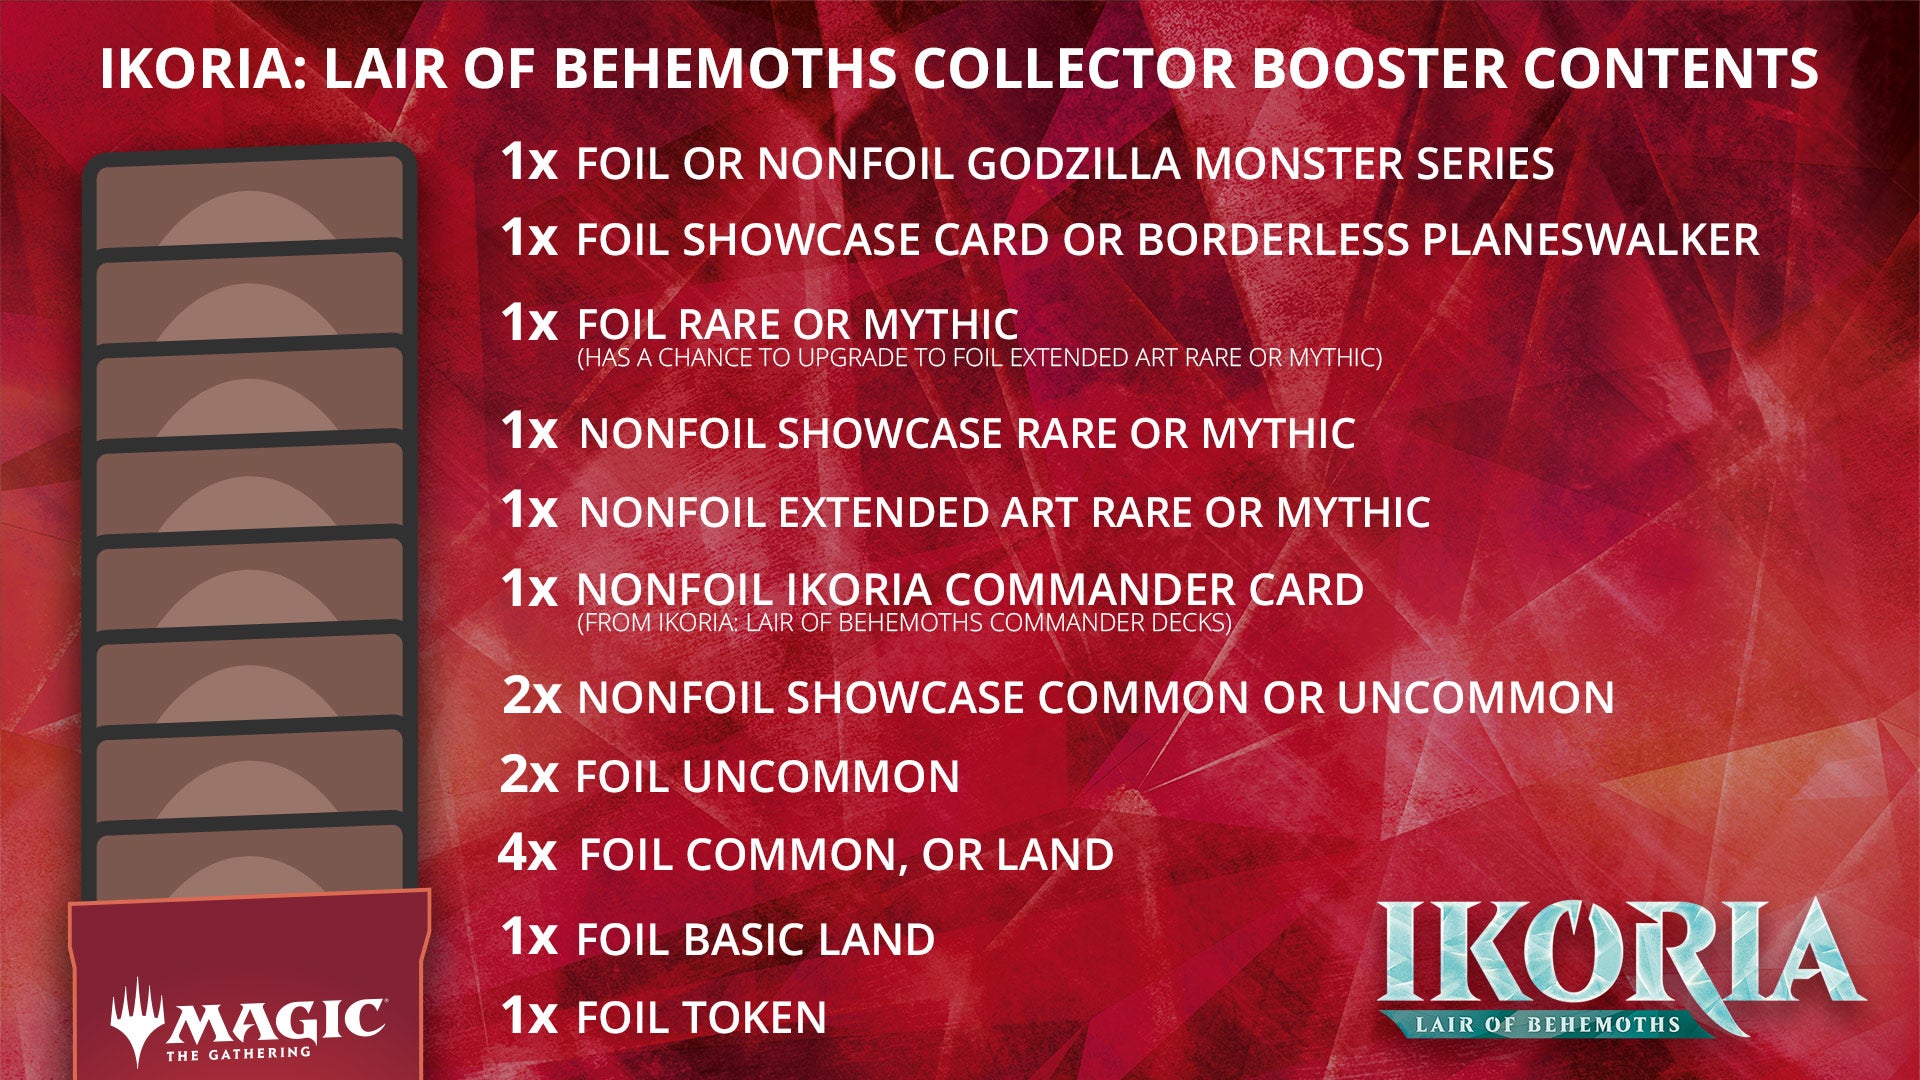 IKORIA Collectors Booster Pack | Tabernacle Games